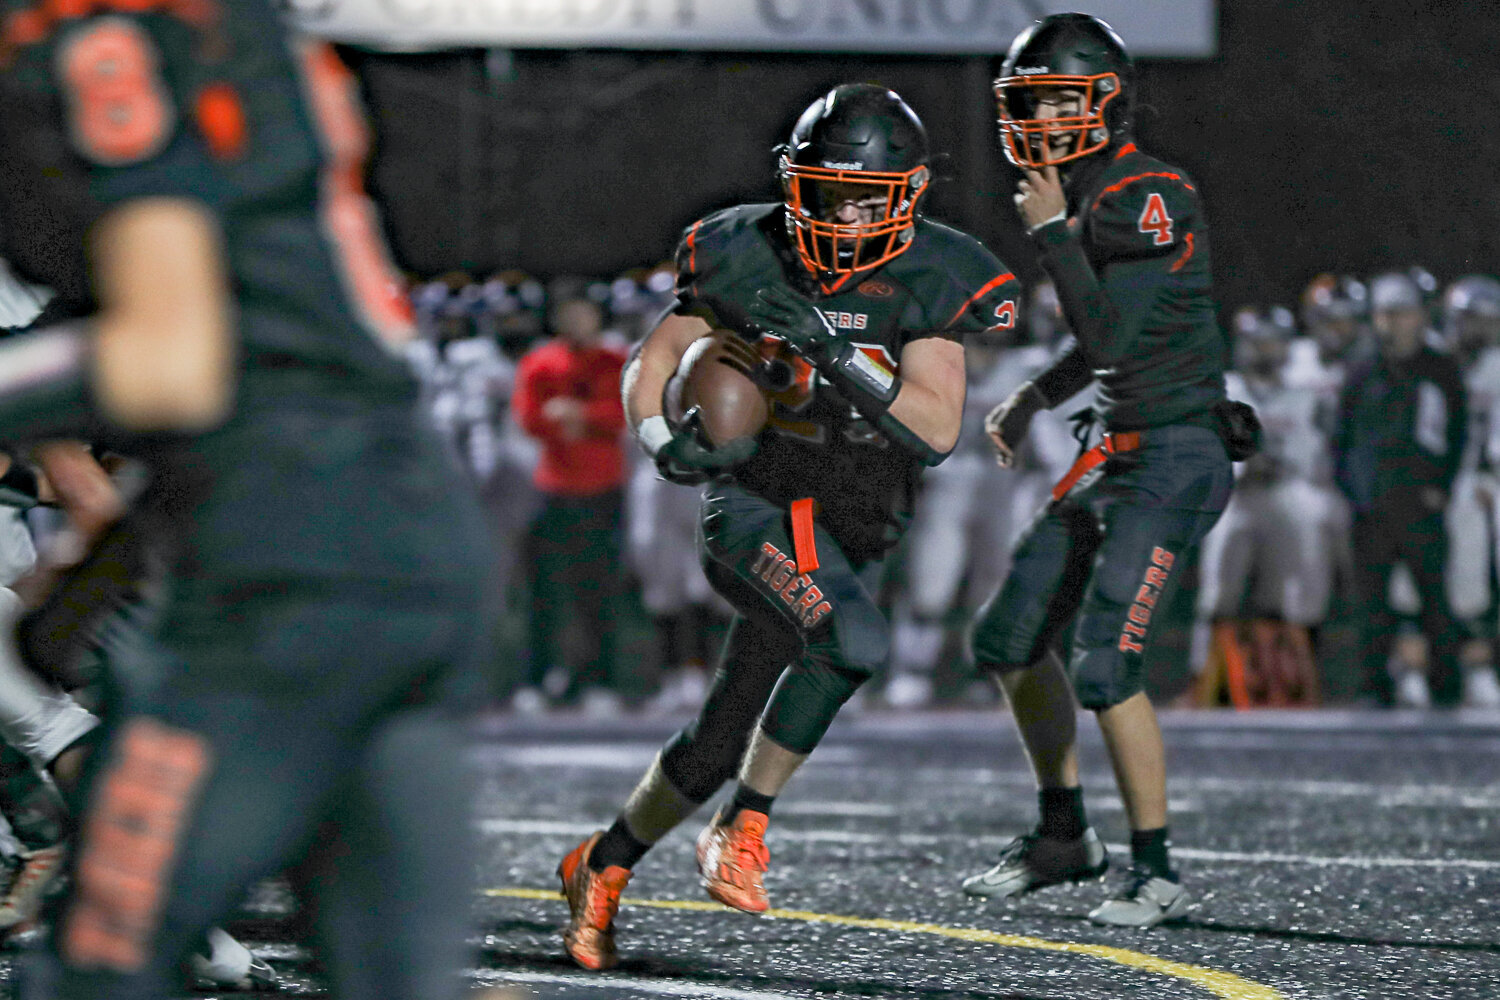 Cayle Kelly runs by defenders during a 43-14 Napavine win over River View on Nov. 18.